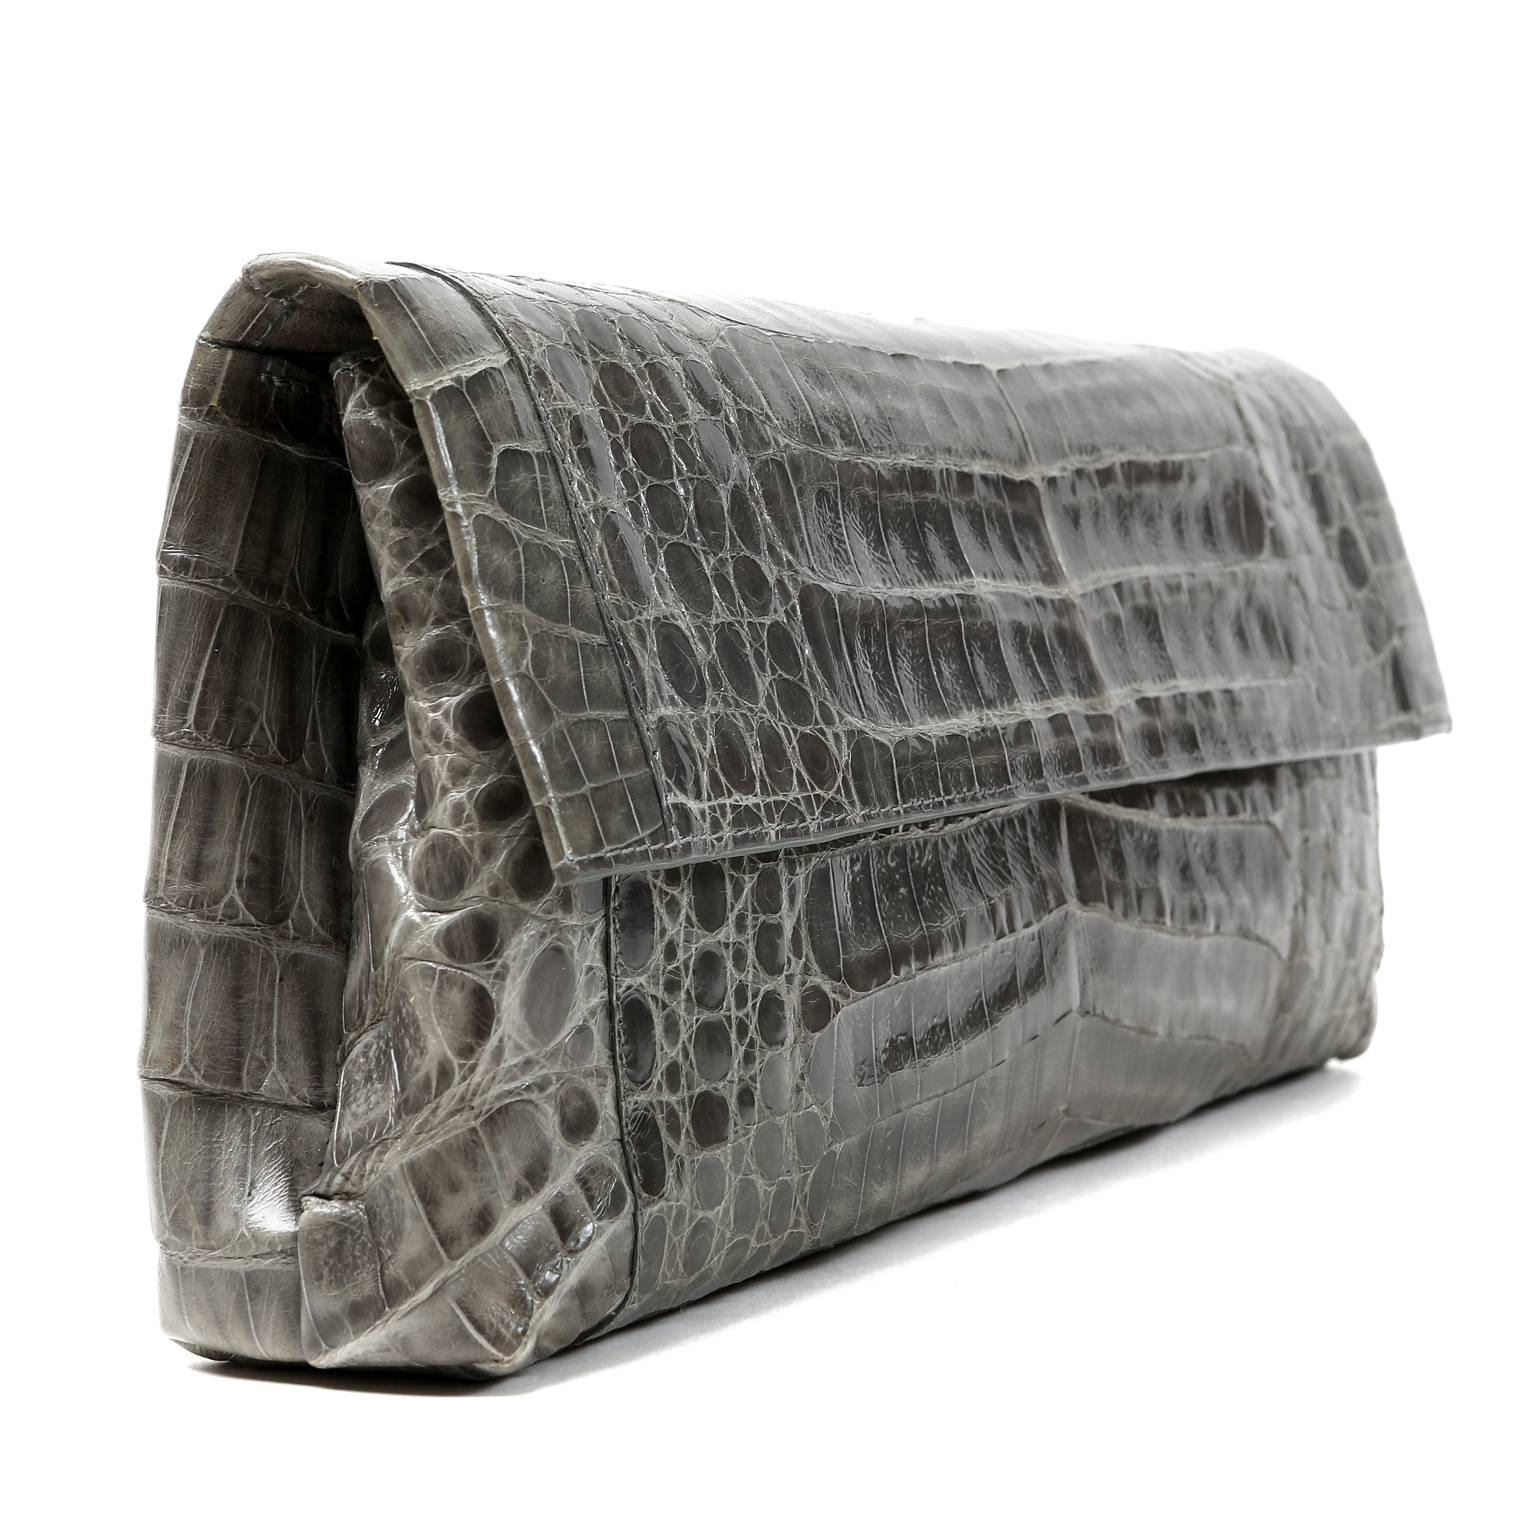 Nancy Gonzalez Grey Crocodile-Oversized Clutch- NEW
Made from the finest skins, Nancy Gonzalez bags are highly collectible classics that always hold their value.
 
Exotic grey glossy crocodile clutch is the perfect piece for any sophisticated